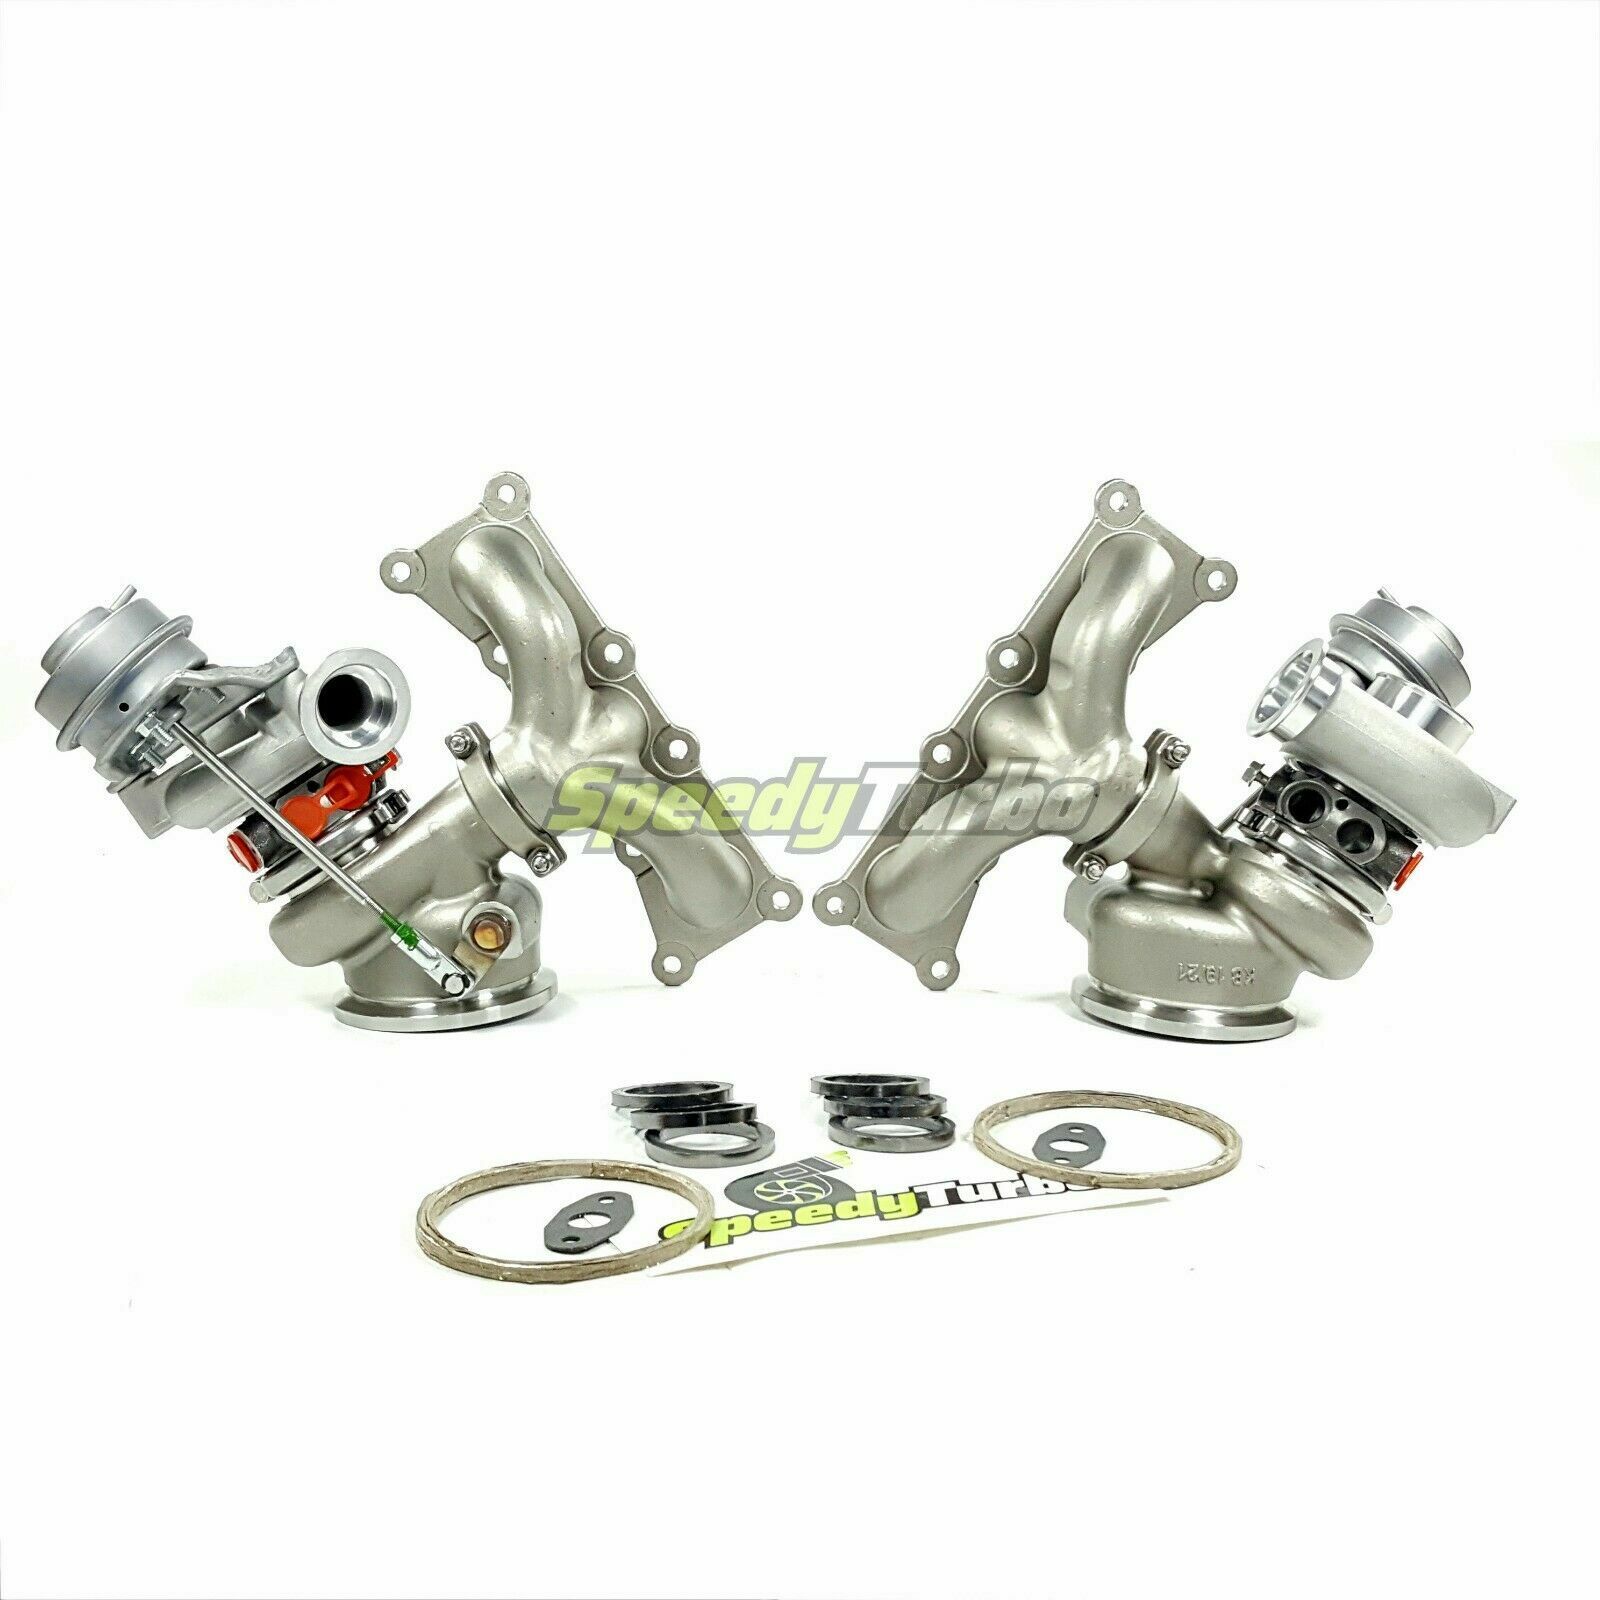 Billet 6+6 Mixed-Flow TD04 19T Upgraded Turbos for BMW 135i 535i 535xi N54 08-10